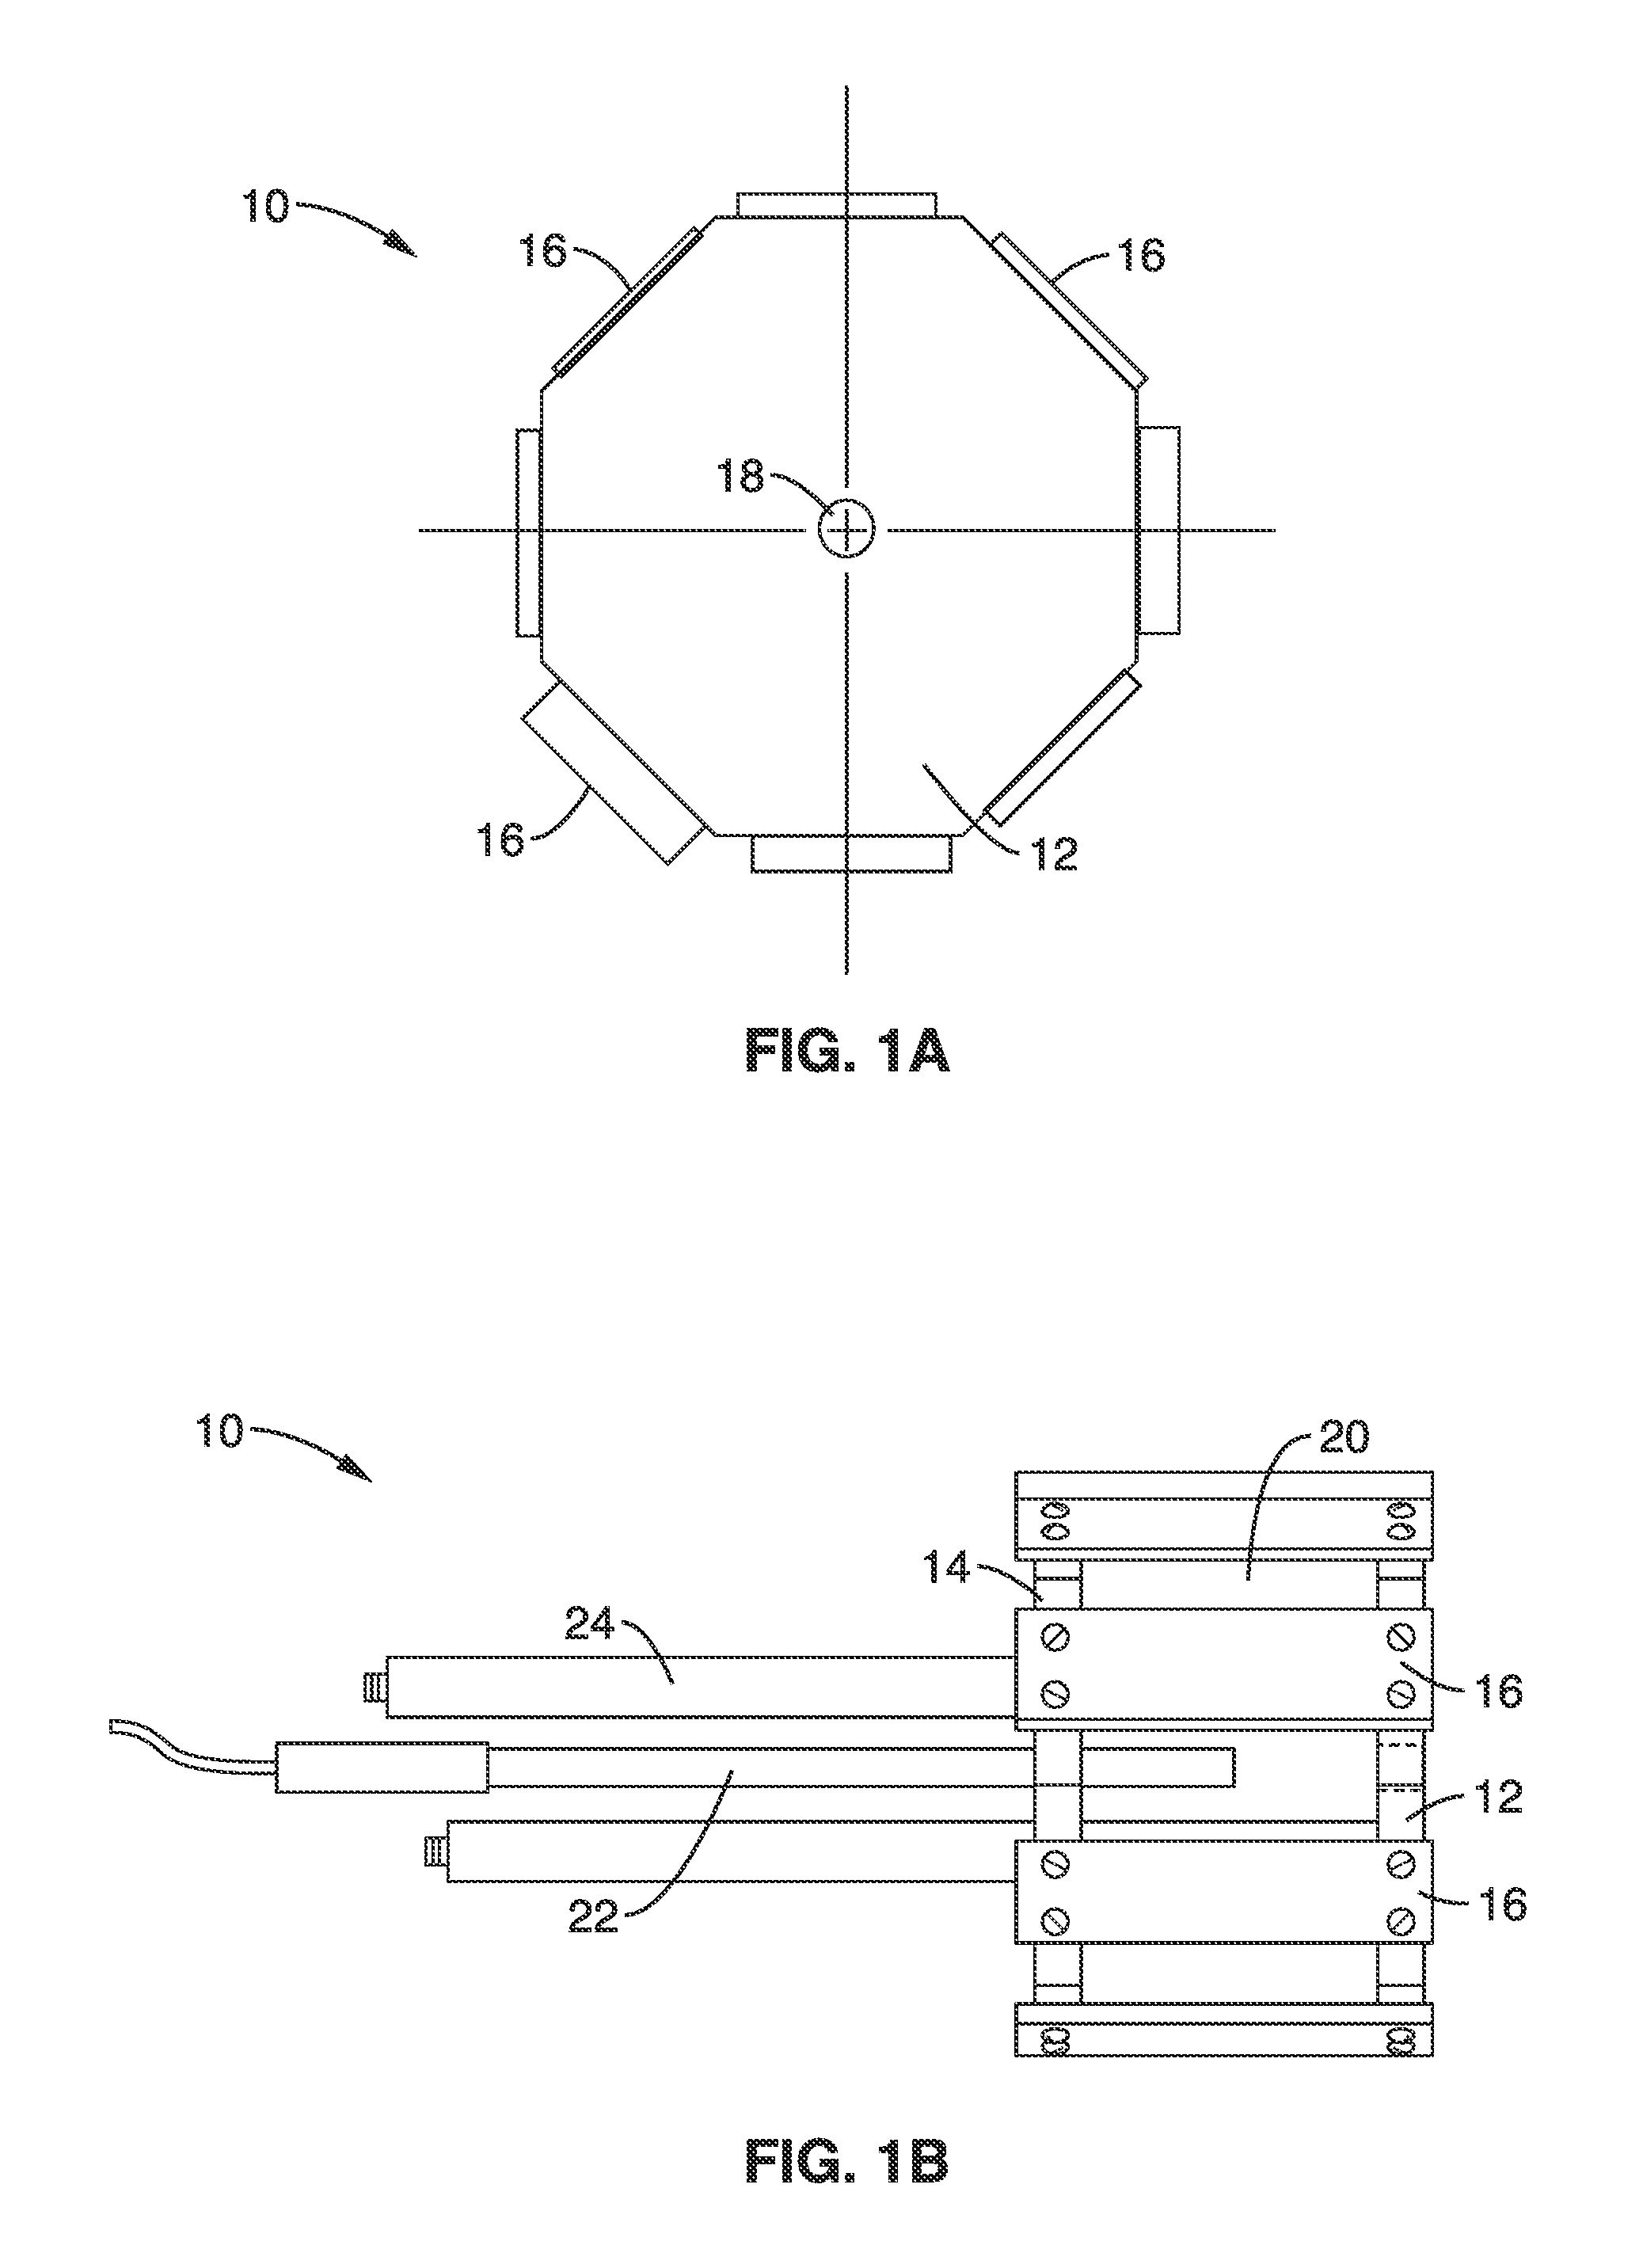 Apparatus and methods for determination of the half value layer of X-ray beams